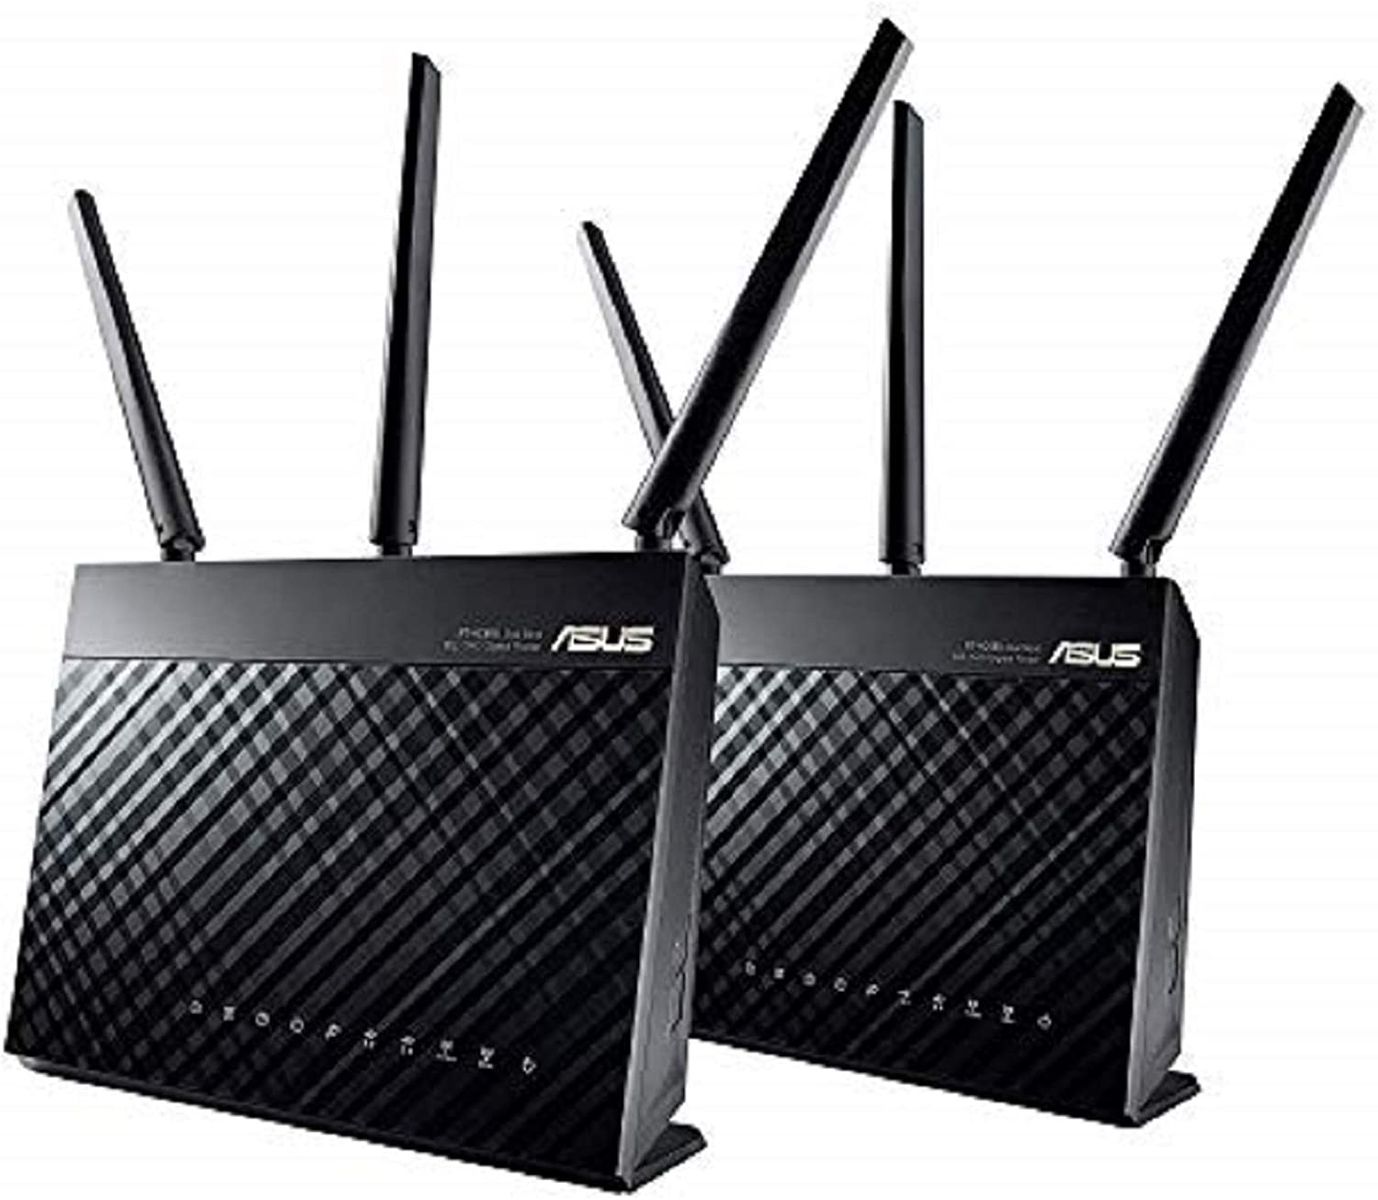 ASUS RT-AC68U WLAN Router Gigabit Ethernet Dual-Band 2.4 GHz/5 GHz Pack of 2